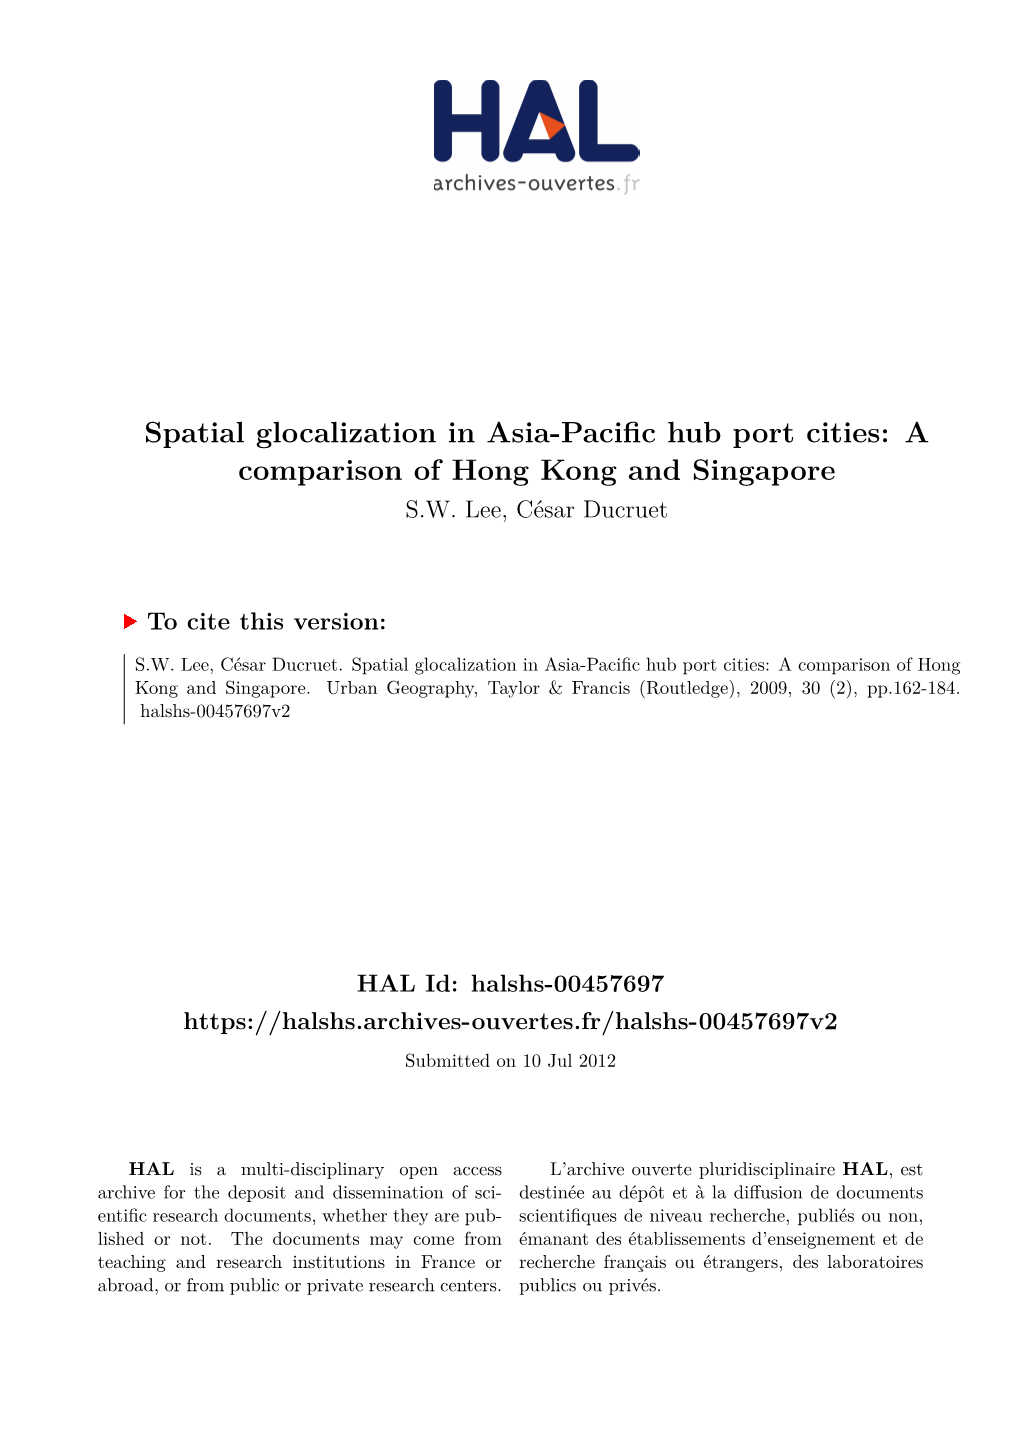 Spatial Glocalization in Asia-Pacific Hub Port Cities: a Comparison of Hong Kong and Singapore S.W